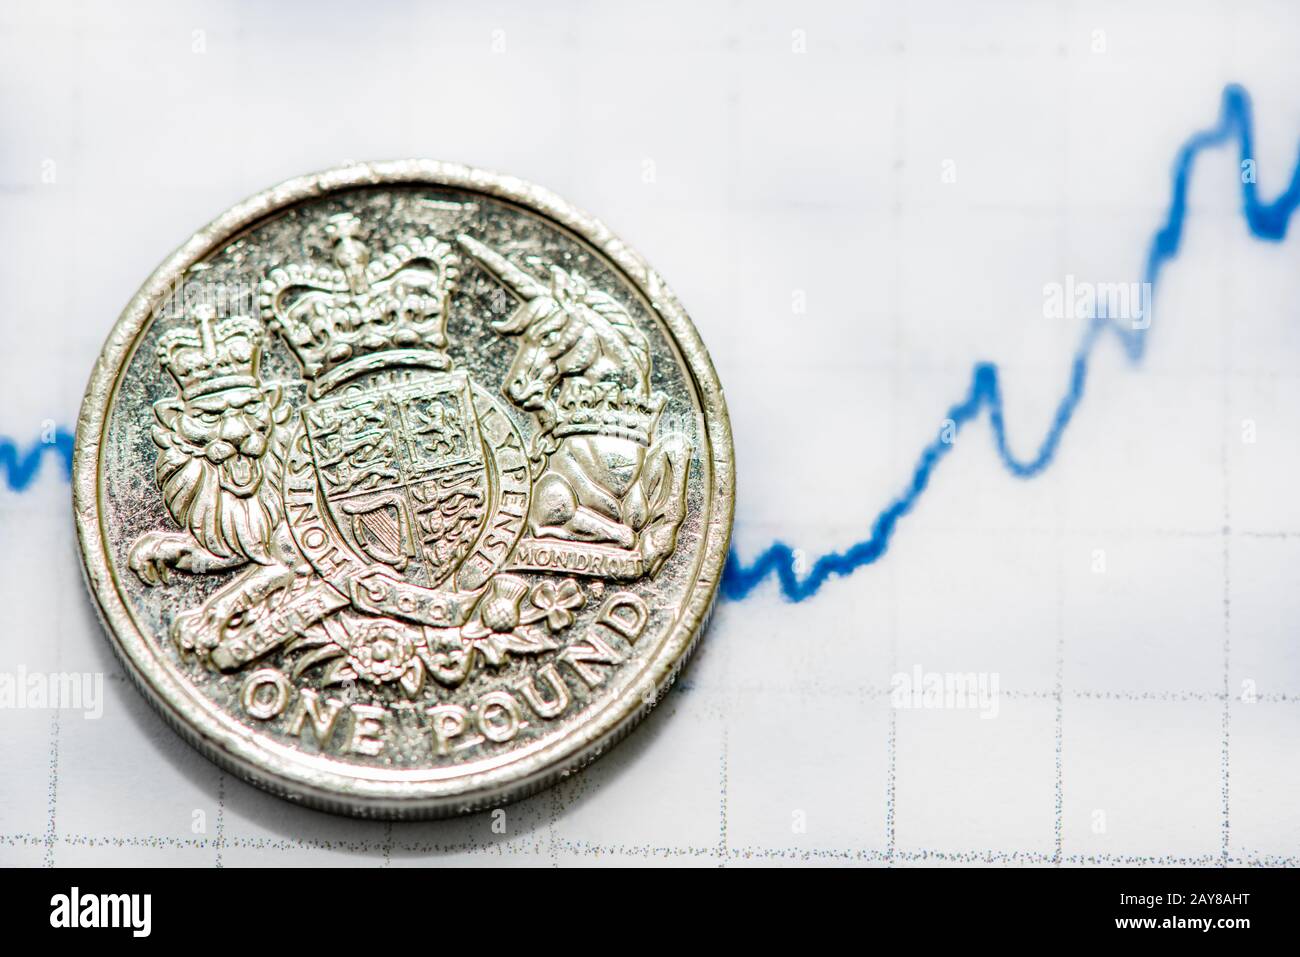 Growning economy in UK, pound coin Stock Photo